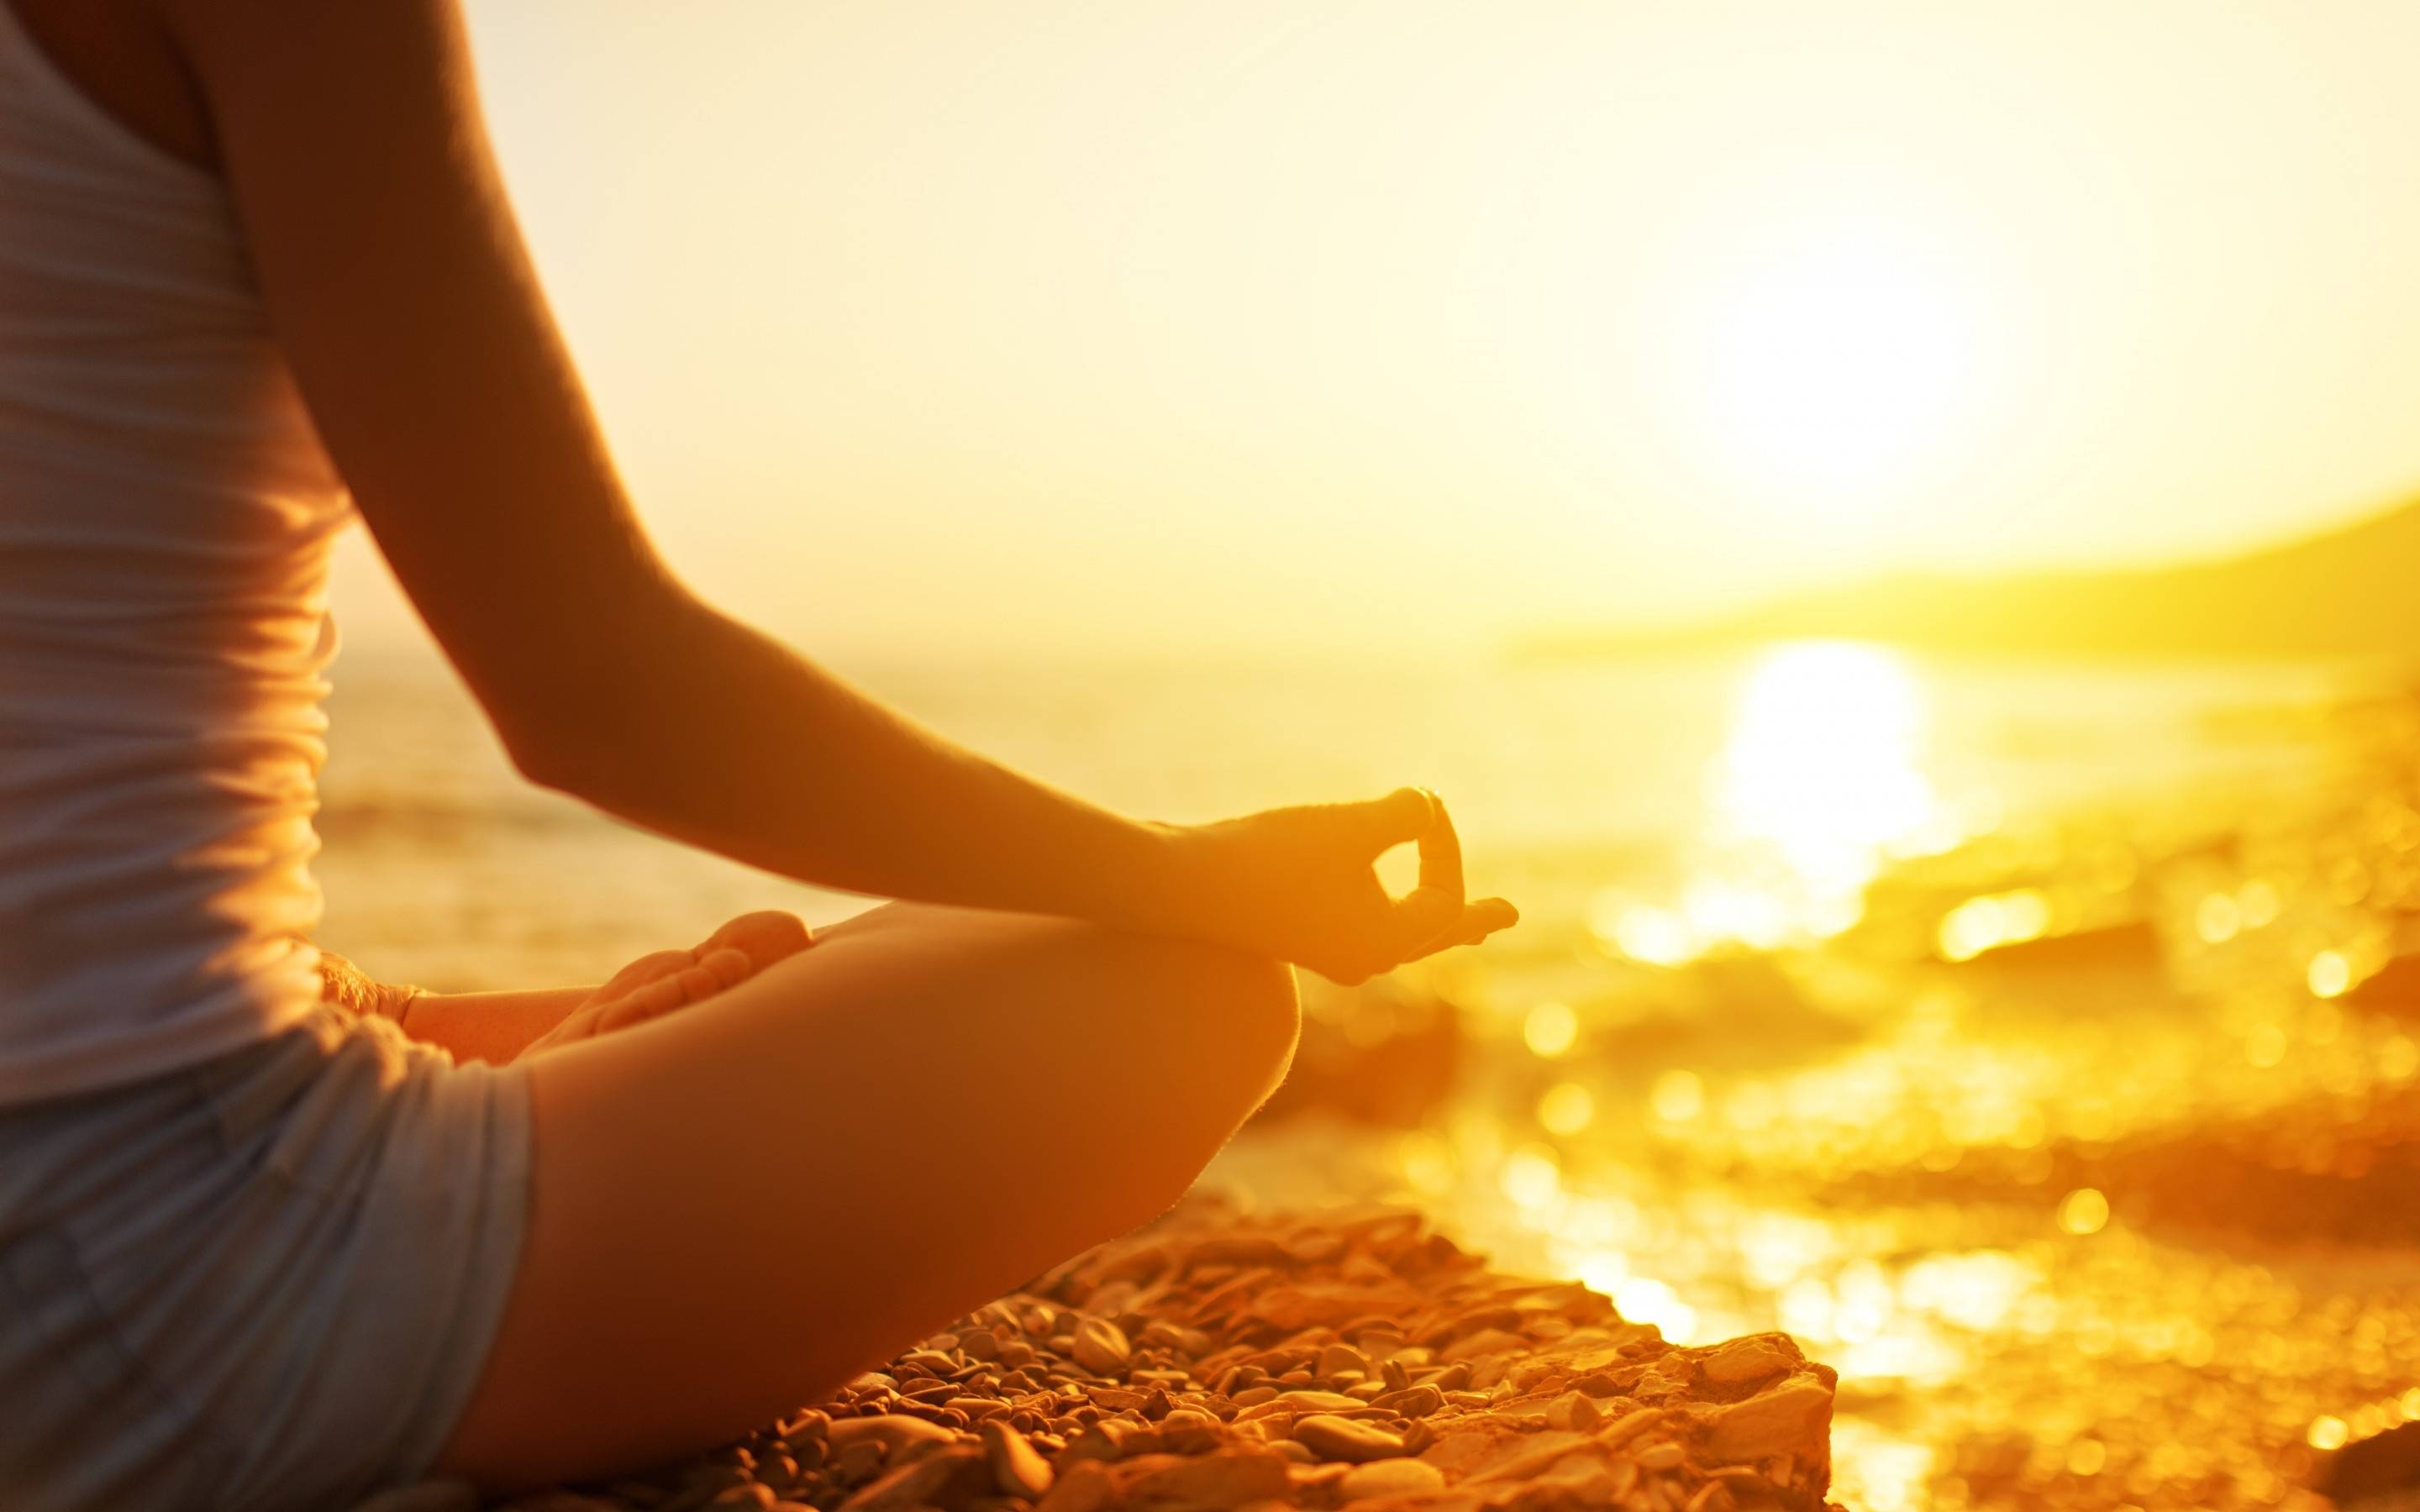 How does meditation relieve stress and for how long?